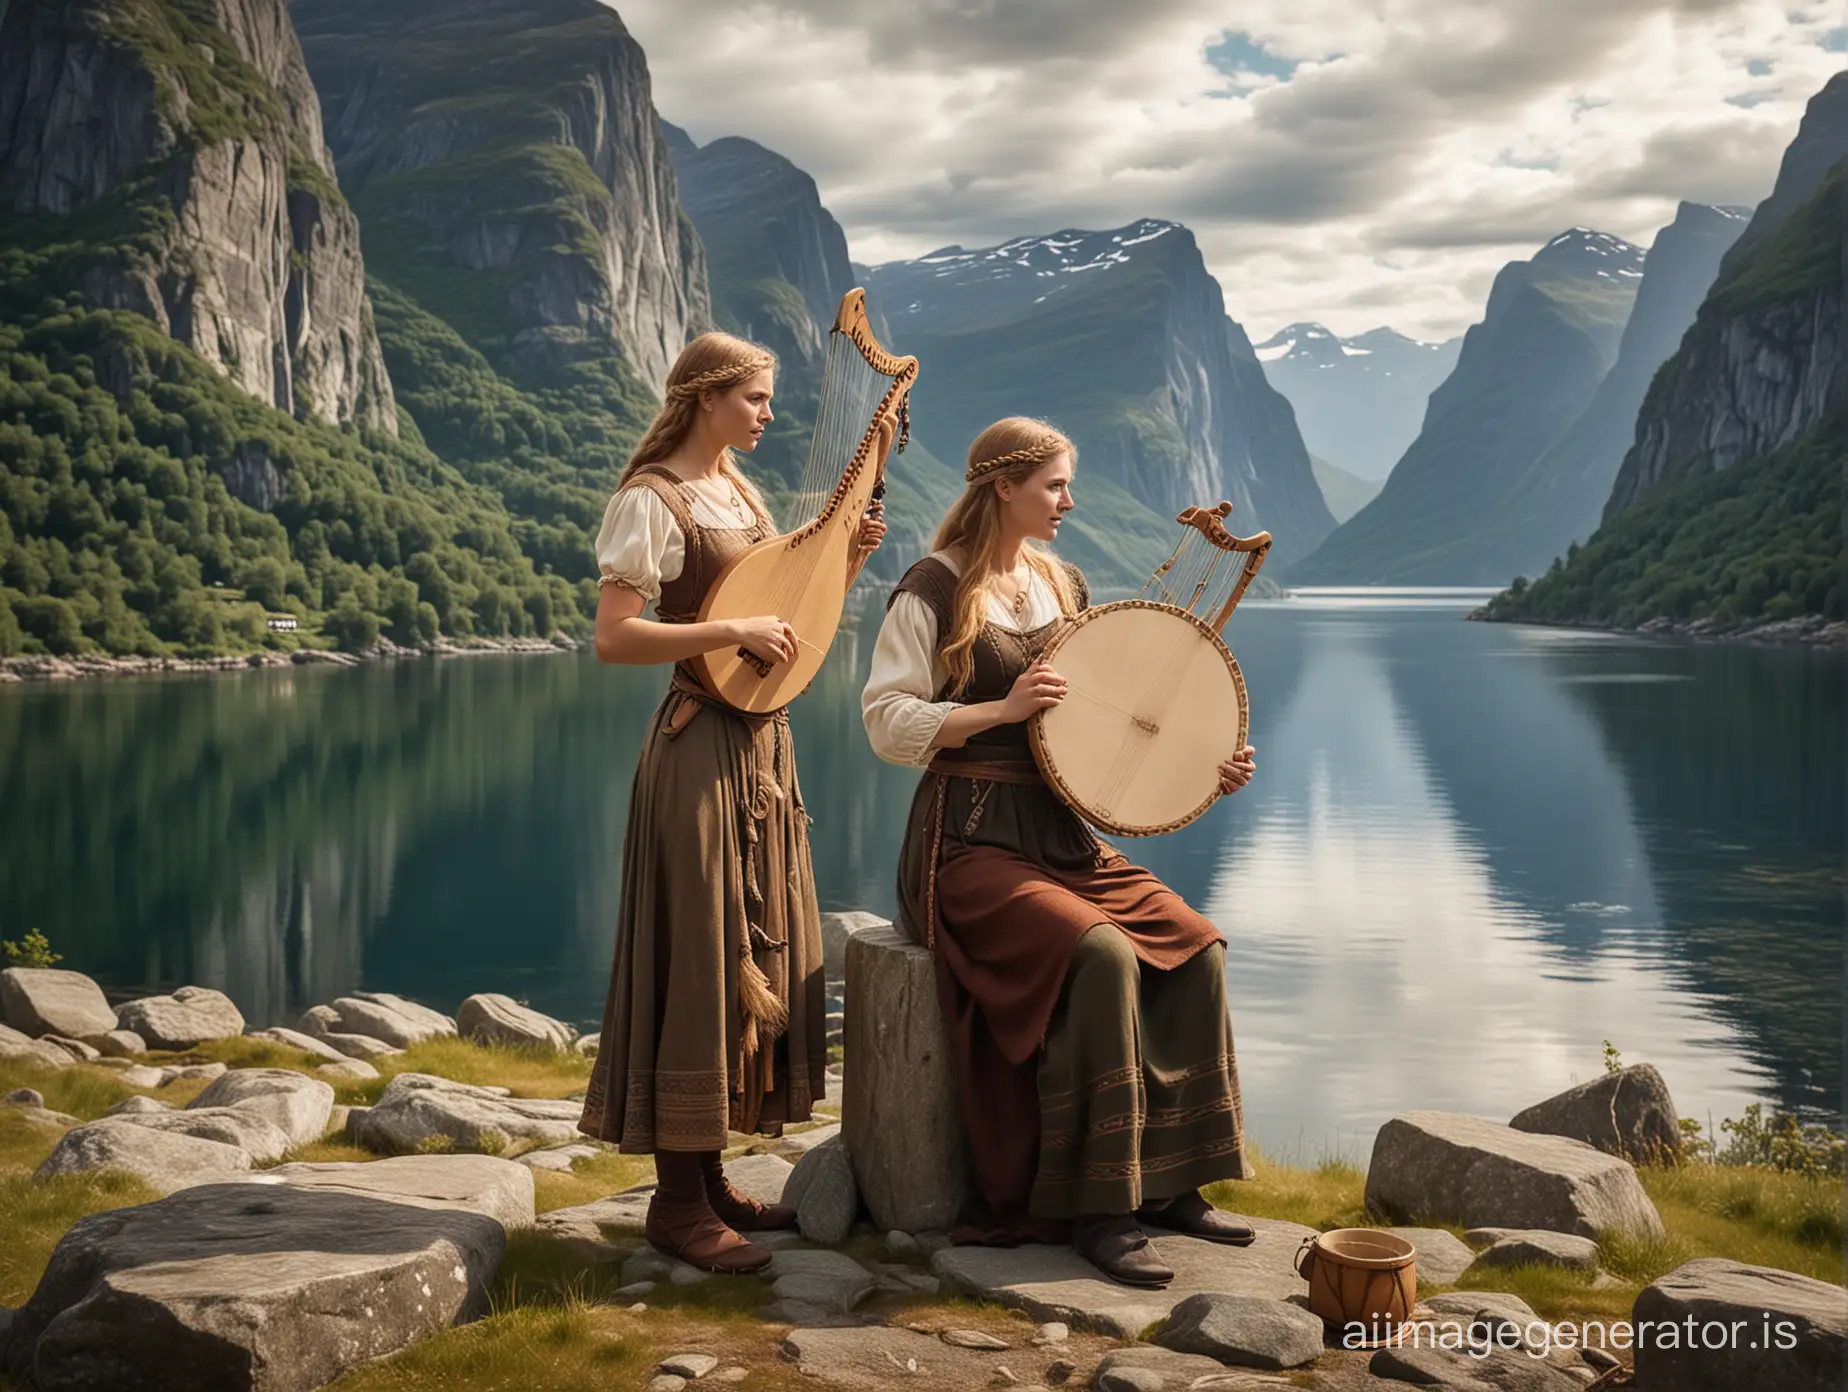 slender Norse woman and man playing lyre and hand drum and a Norwegian fjord background